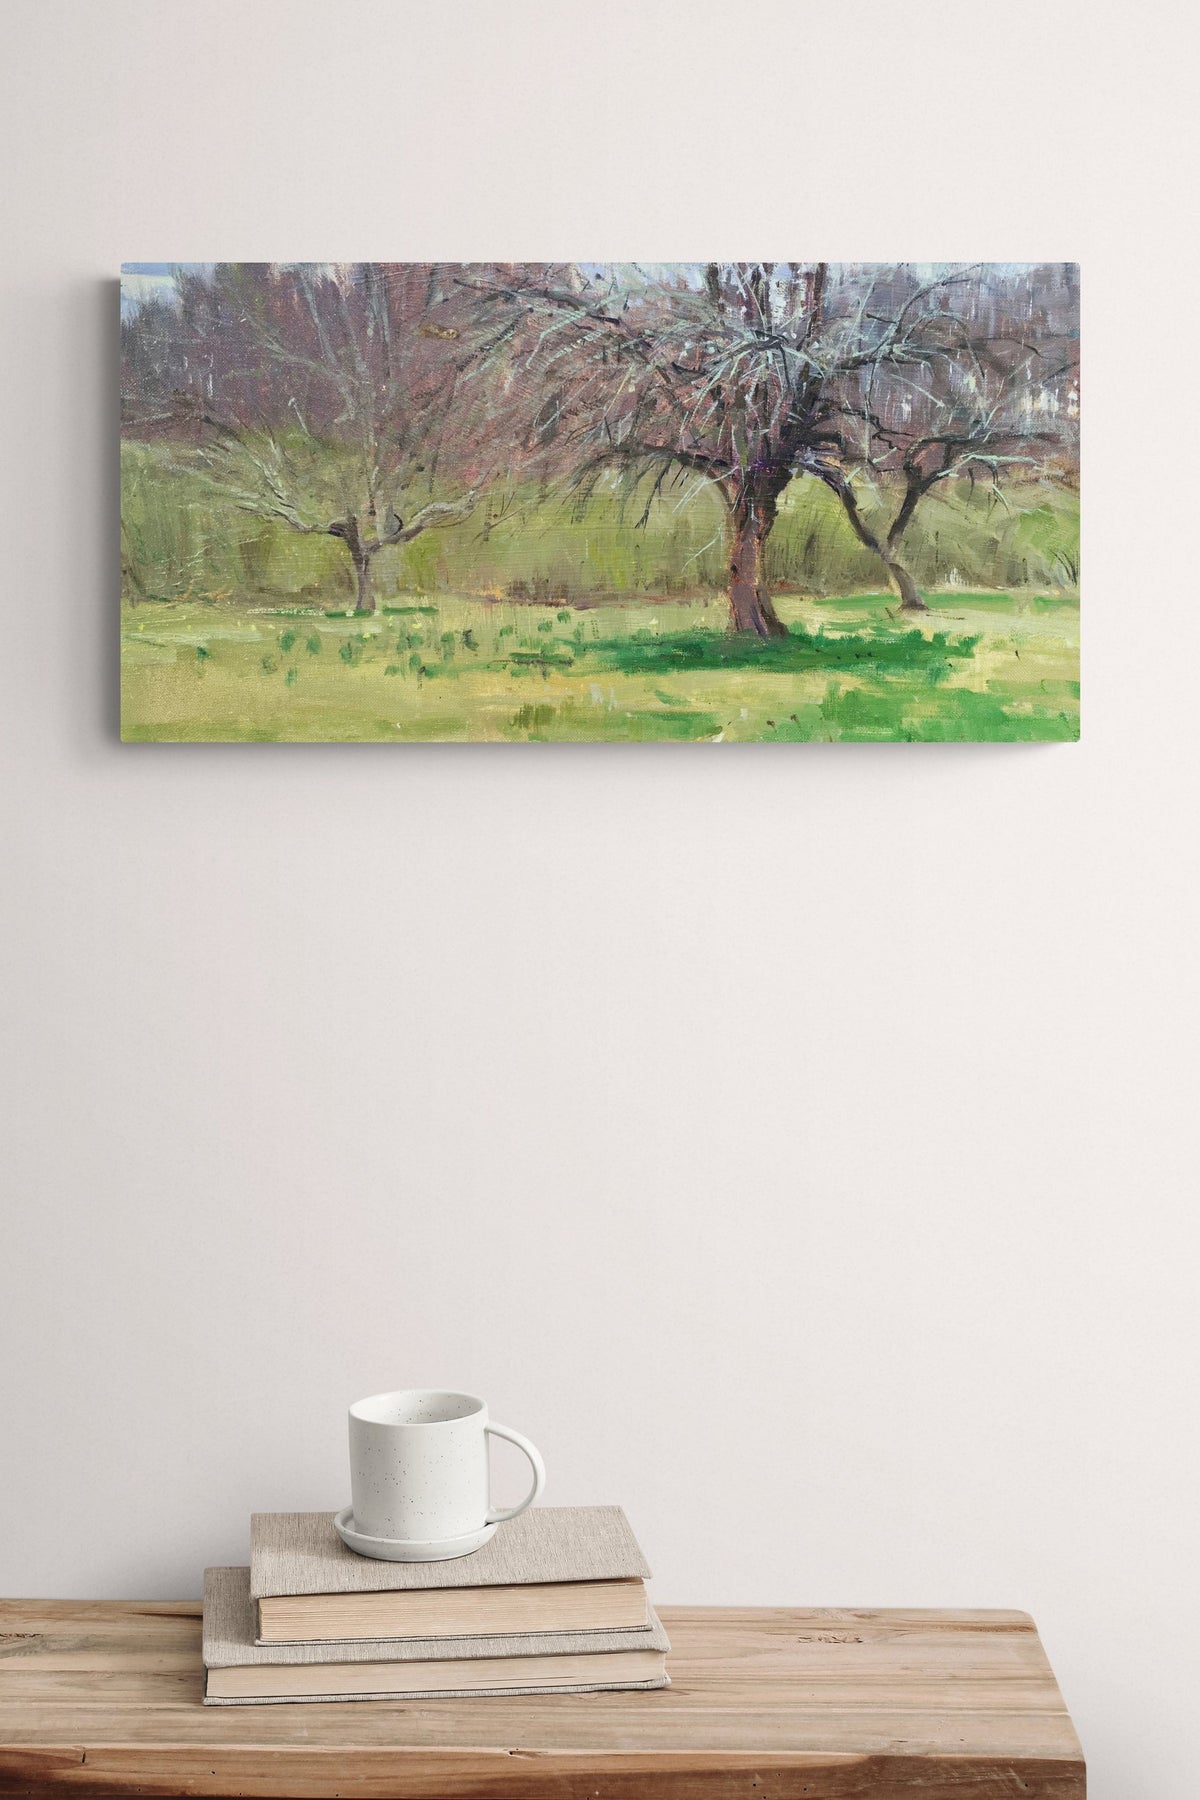 Contemporary Landscape Tree Painting adds nature and green life to this simple office